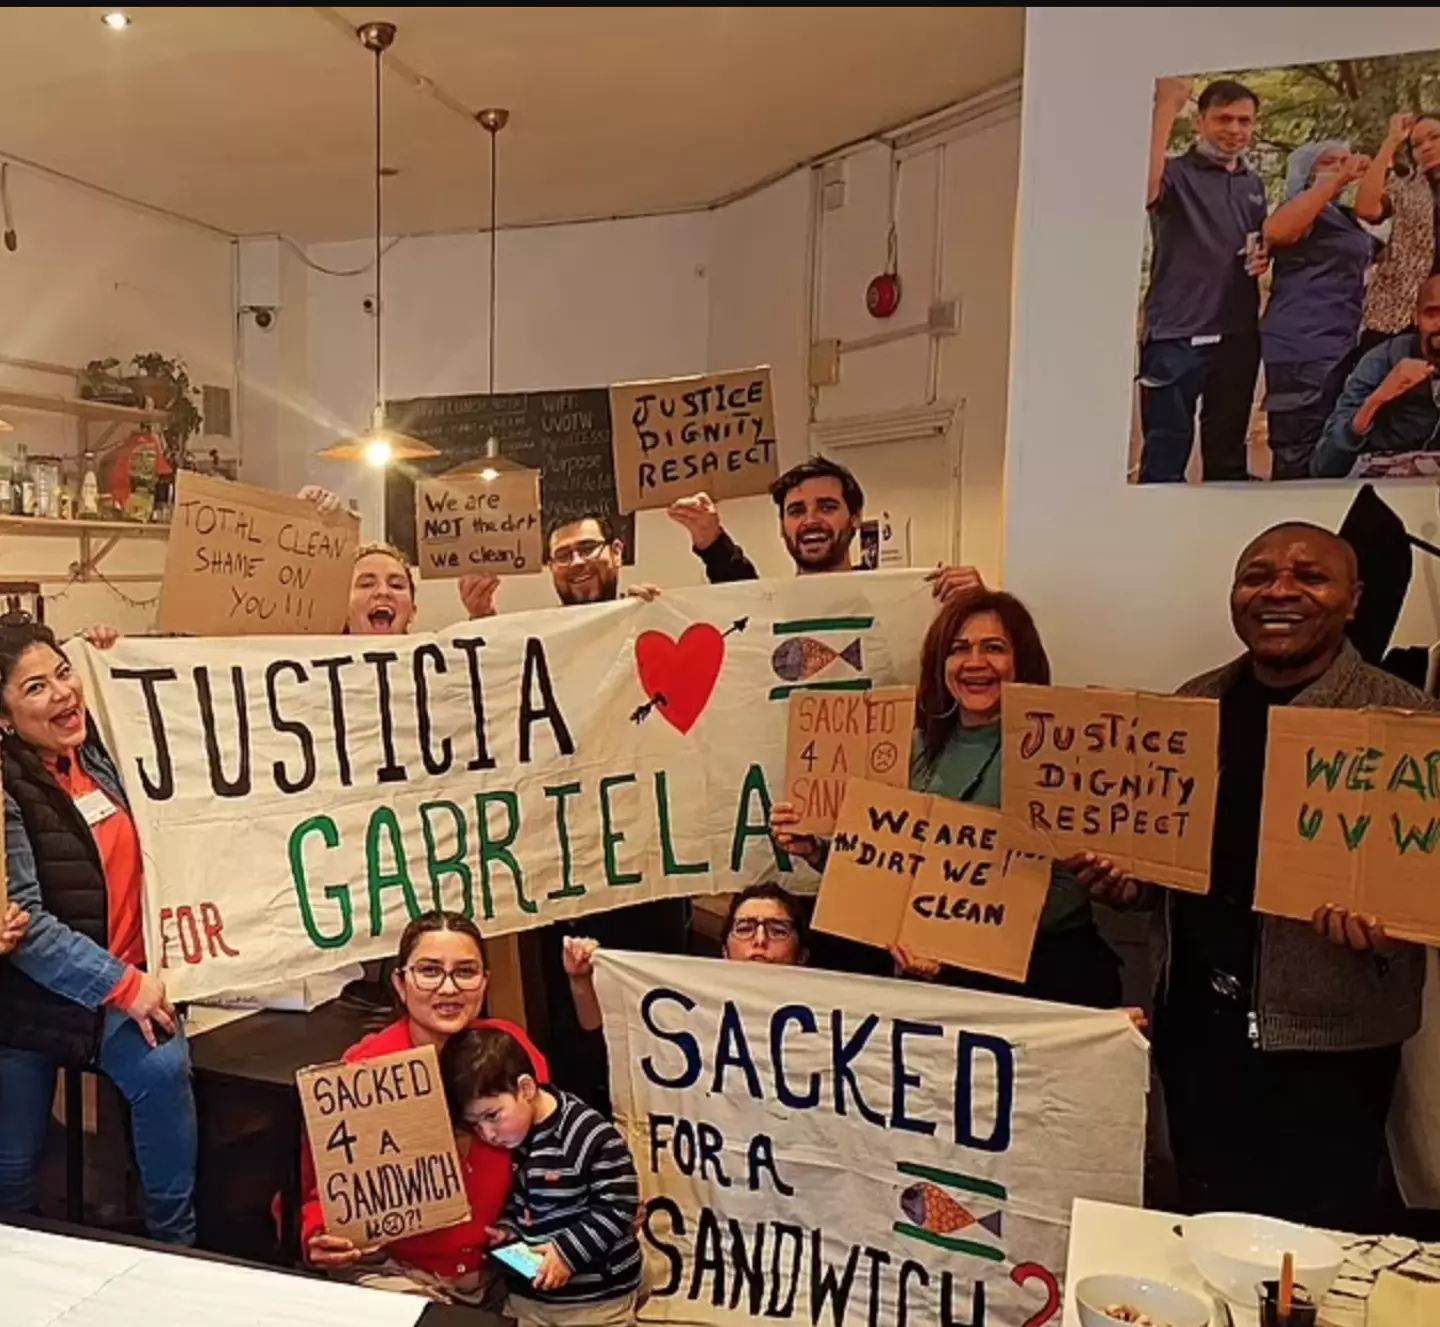 The UVW Union is now helping Gabriela sue her former employer.